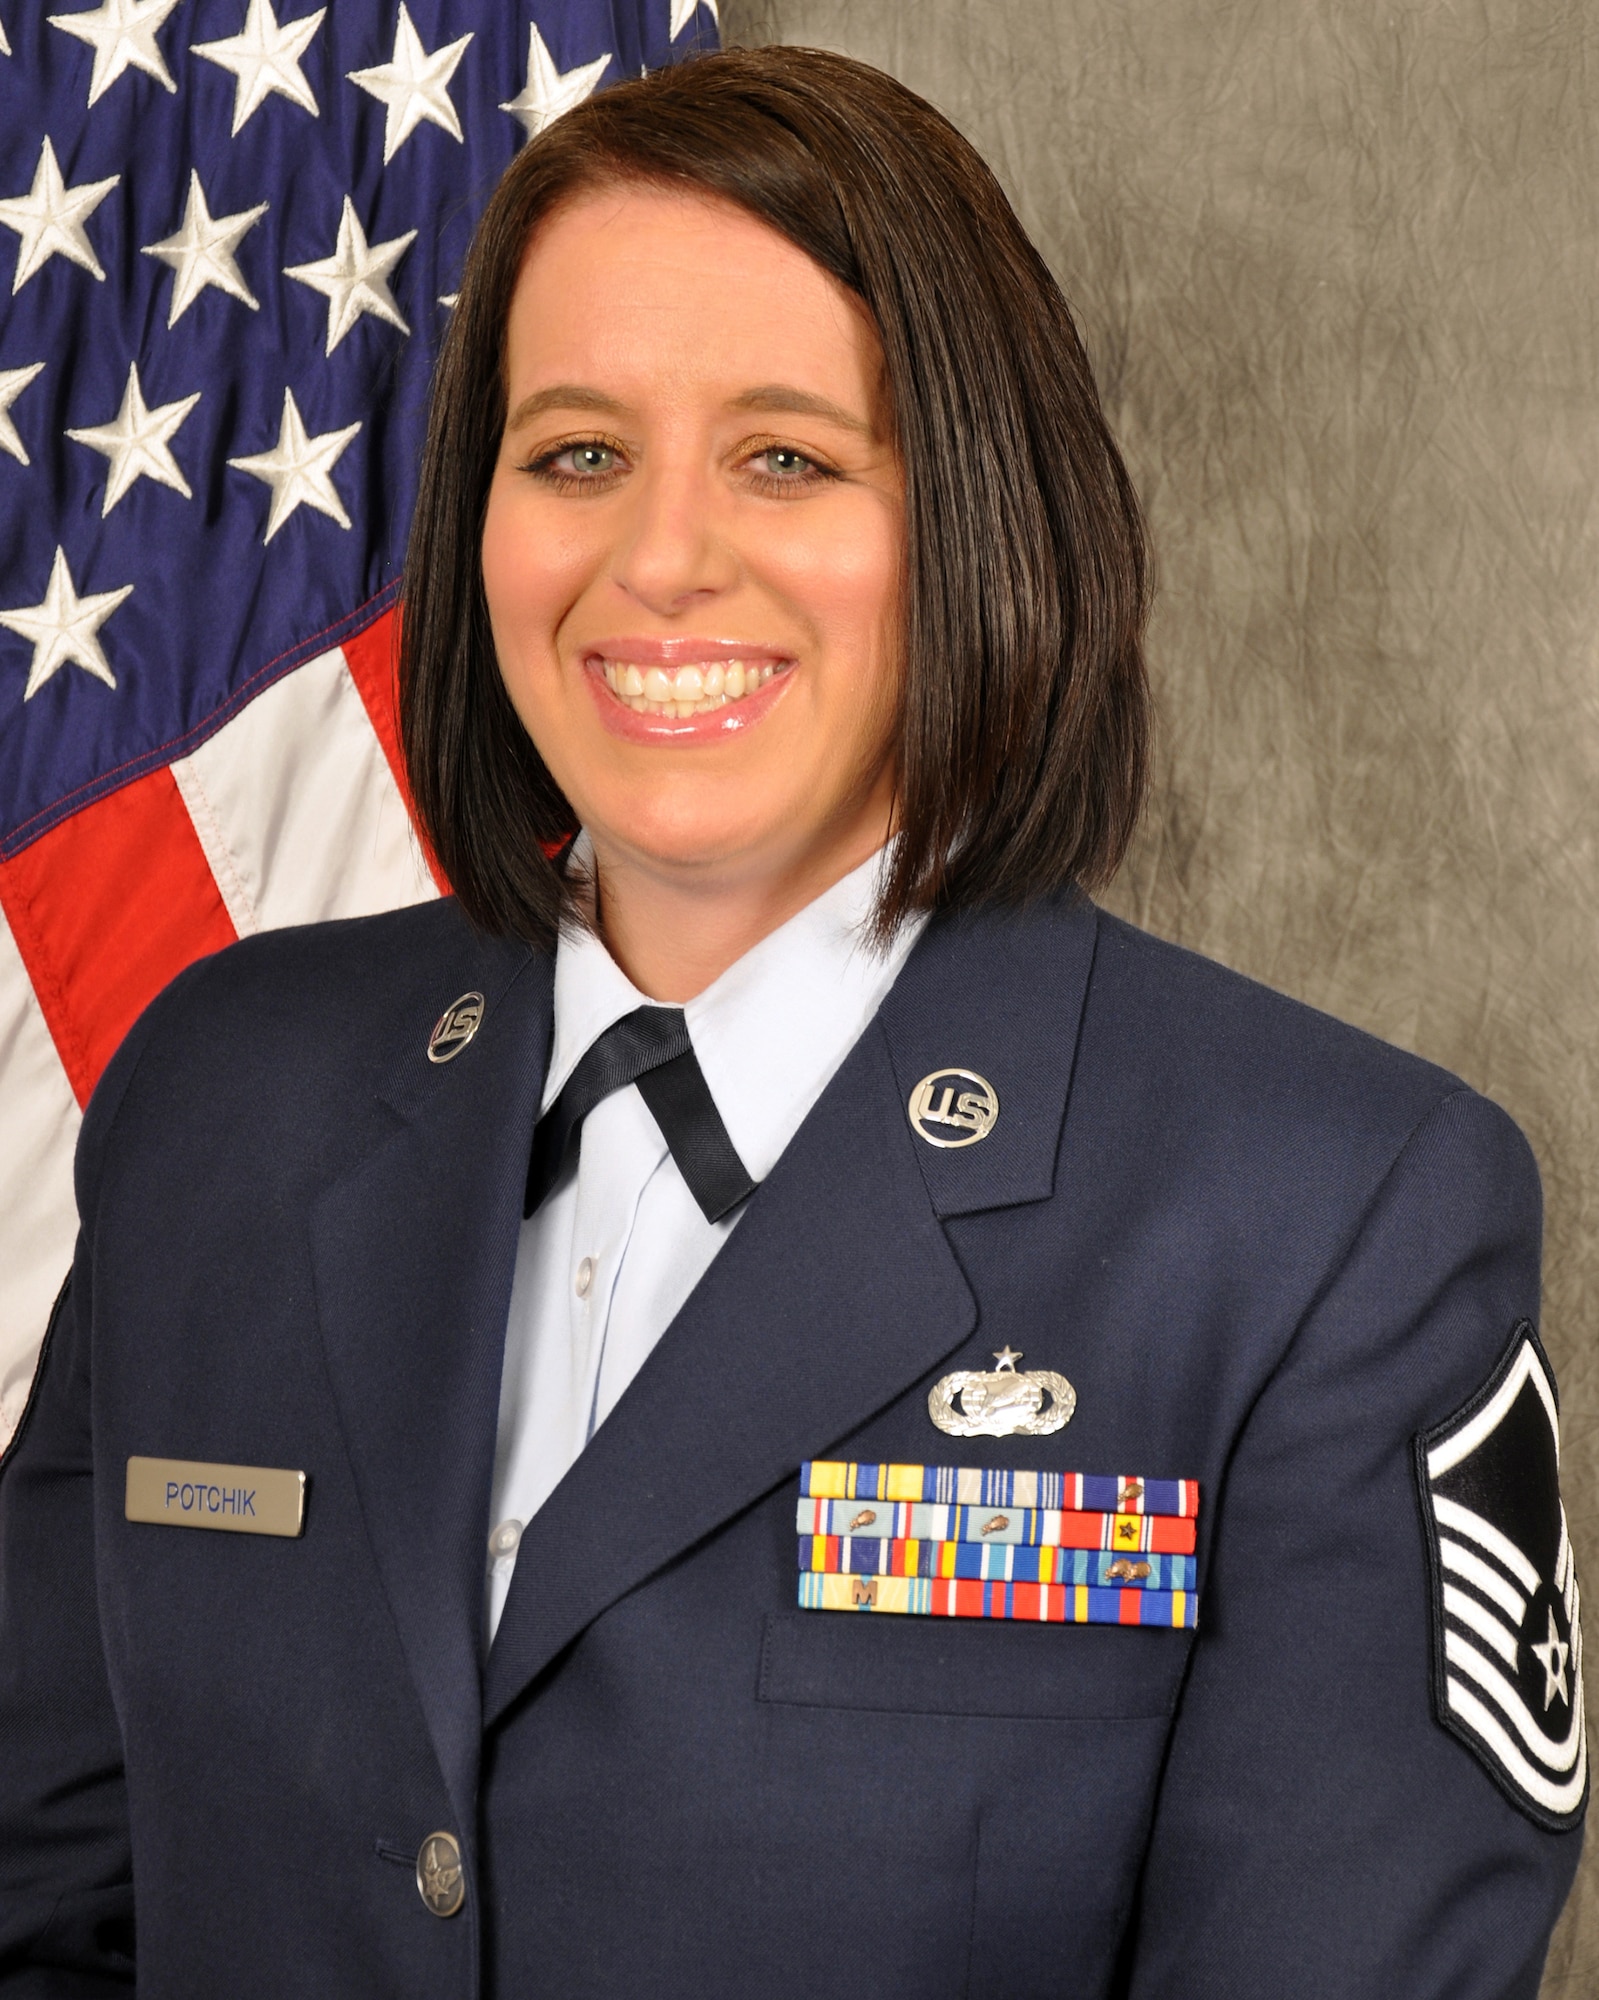 Master Sgt. Angela Potchik is the new point of contact for the Yellow Ribbon Reintegration Program. Potchik is a long-time member of the 445th Airlift Wing and 445th Maintenance Group commander support staff superintendent.